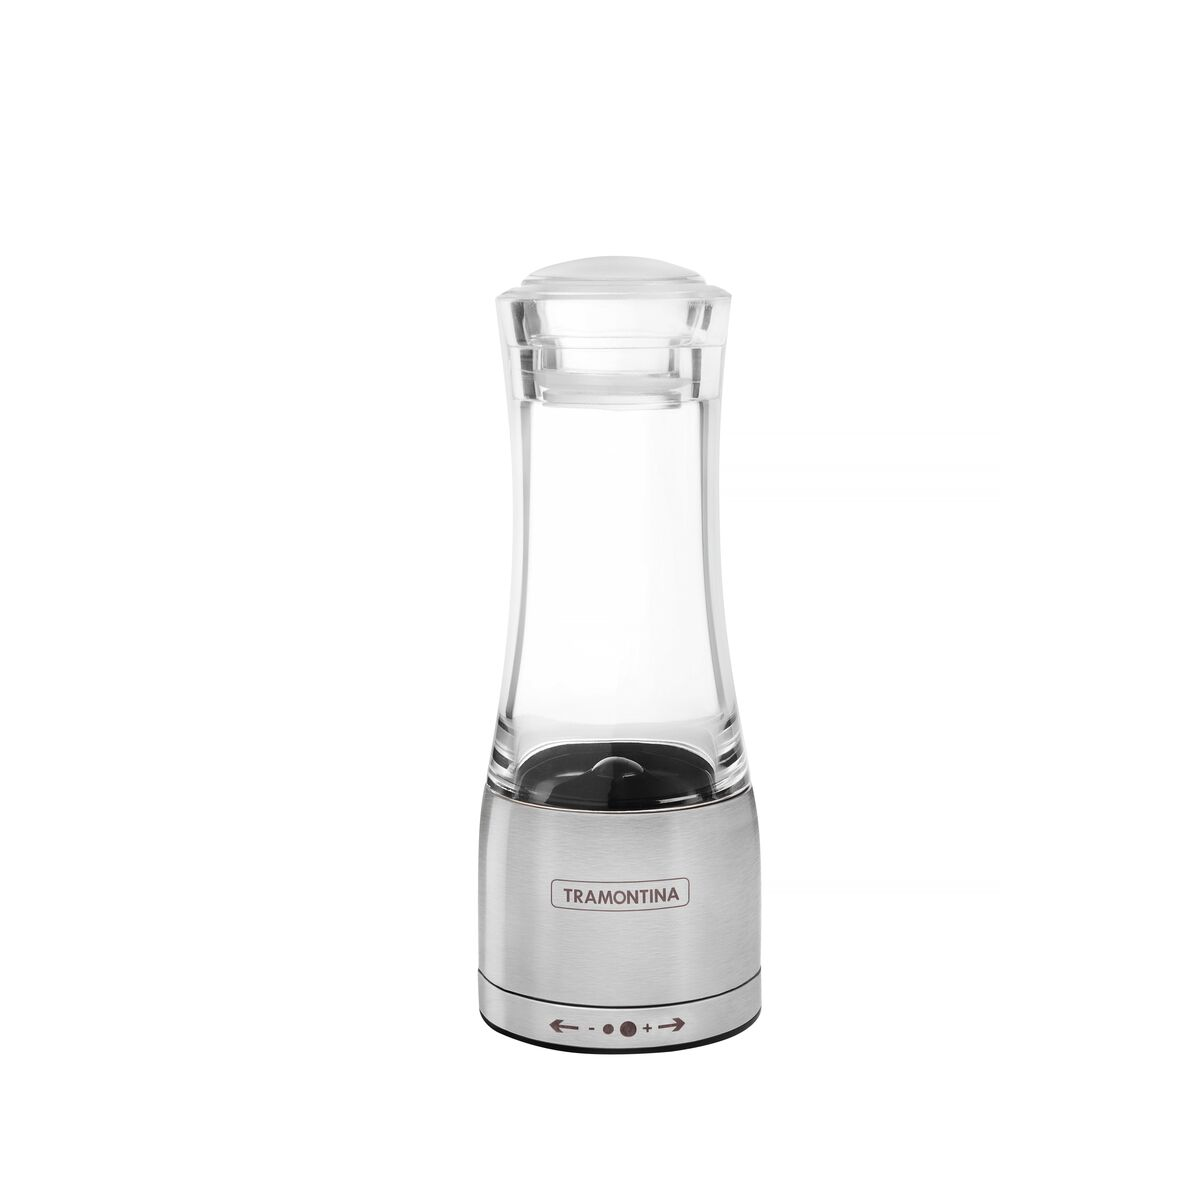 Tramontina Realce stainless steel and acrylic salt and pepper mill with ceramic grinder